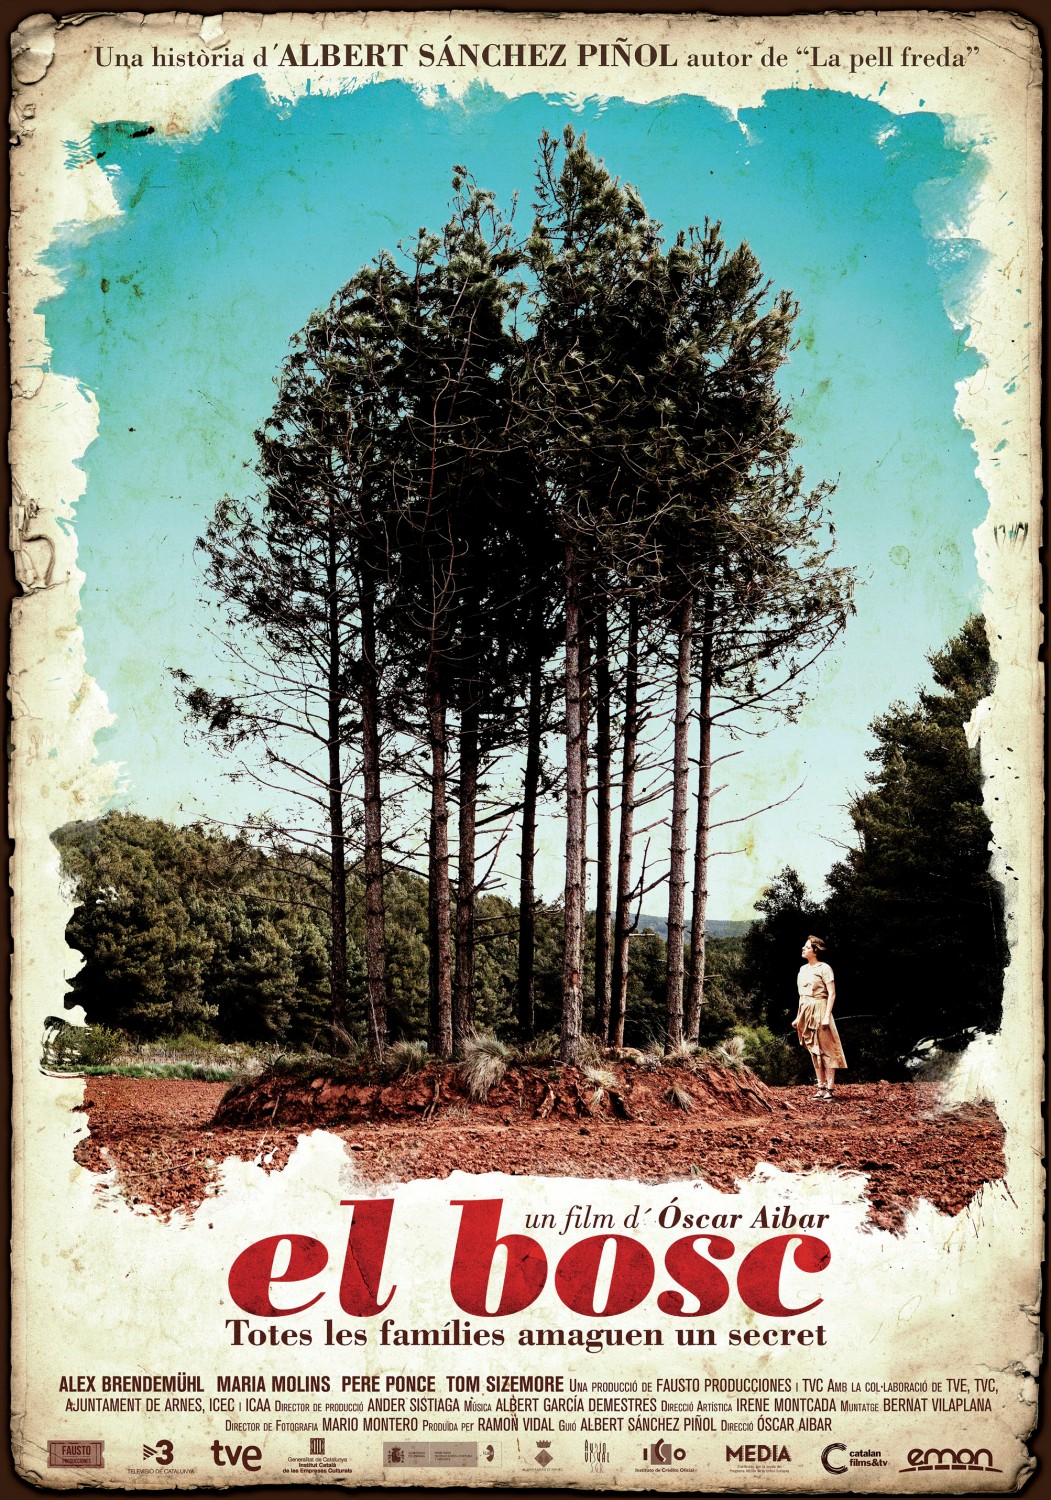 Extra Large Movie Poster Image for El bosc 